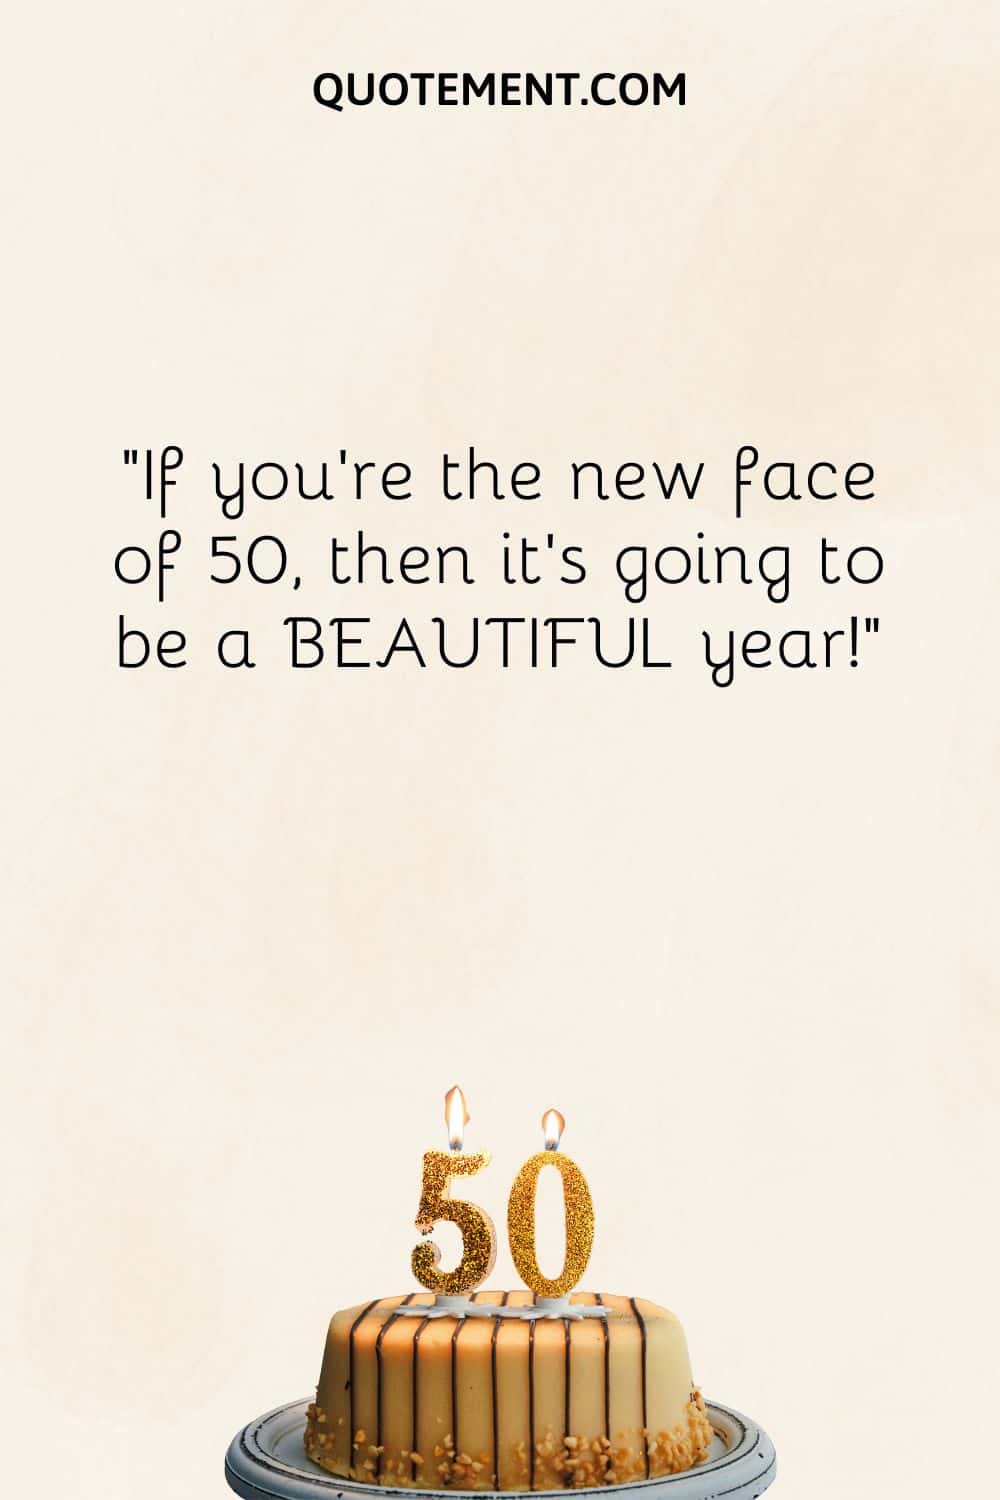 “If you’re the new face of 50, then it’s going to be a BEAUTIFUL year!”